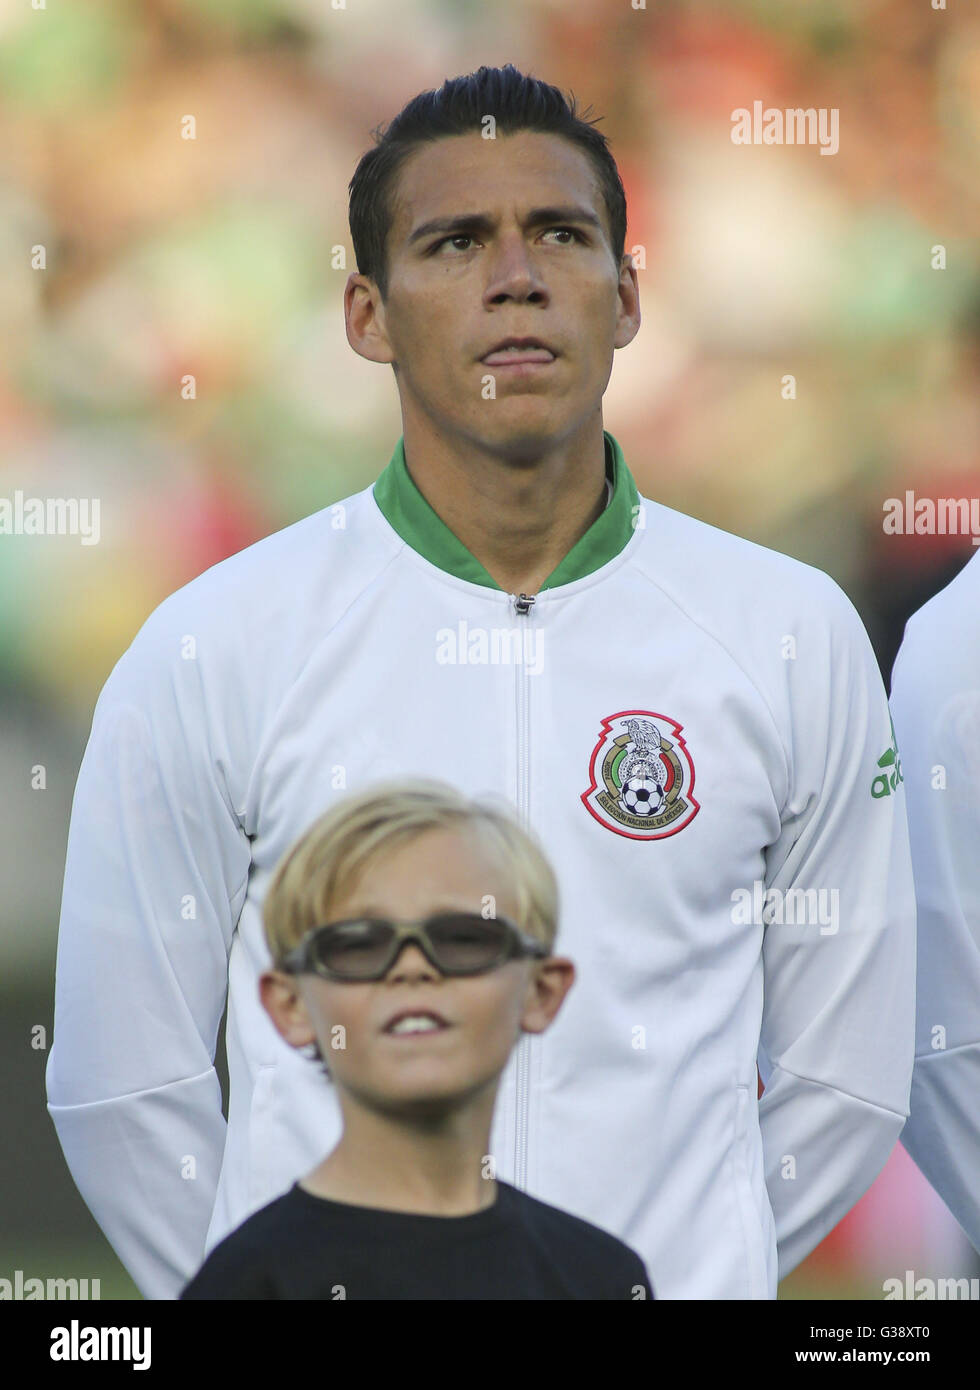 Los Angeles, California, USA. 9th June, 2016. Mexico defender Hector Moreno #15 in a Copa America soccer match between Mexico and ÃŠJamaica of Group C at the Rose Bowl in Pasadena, California, June 9, 2016. Mexico won 2-0. Credit:  Ringo Chiu/ZUMA Wire/Alamy Live News Stock Photo